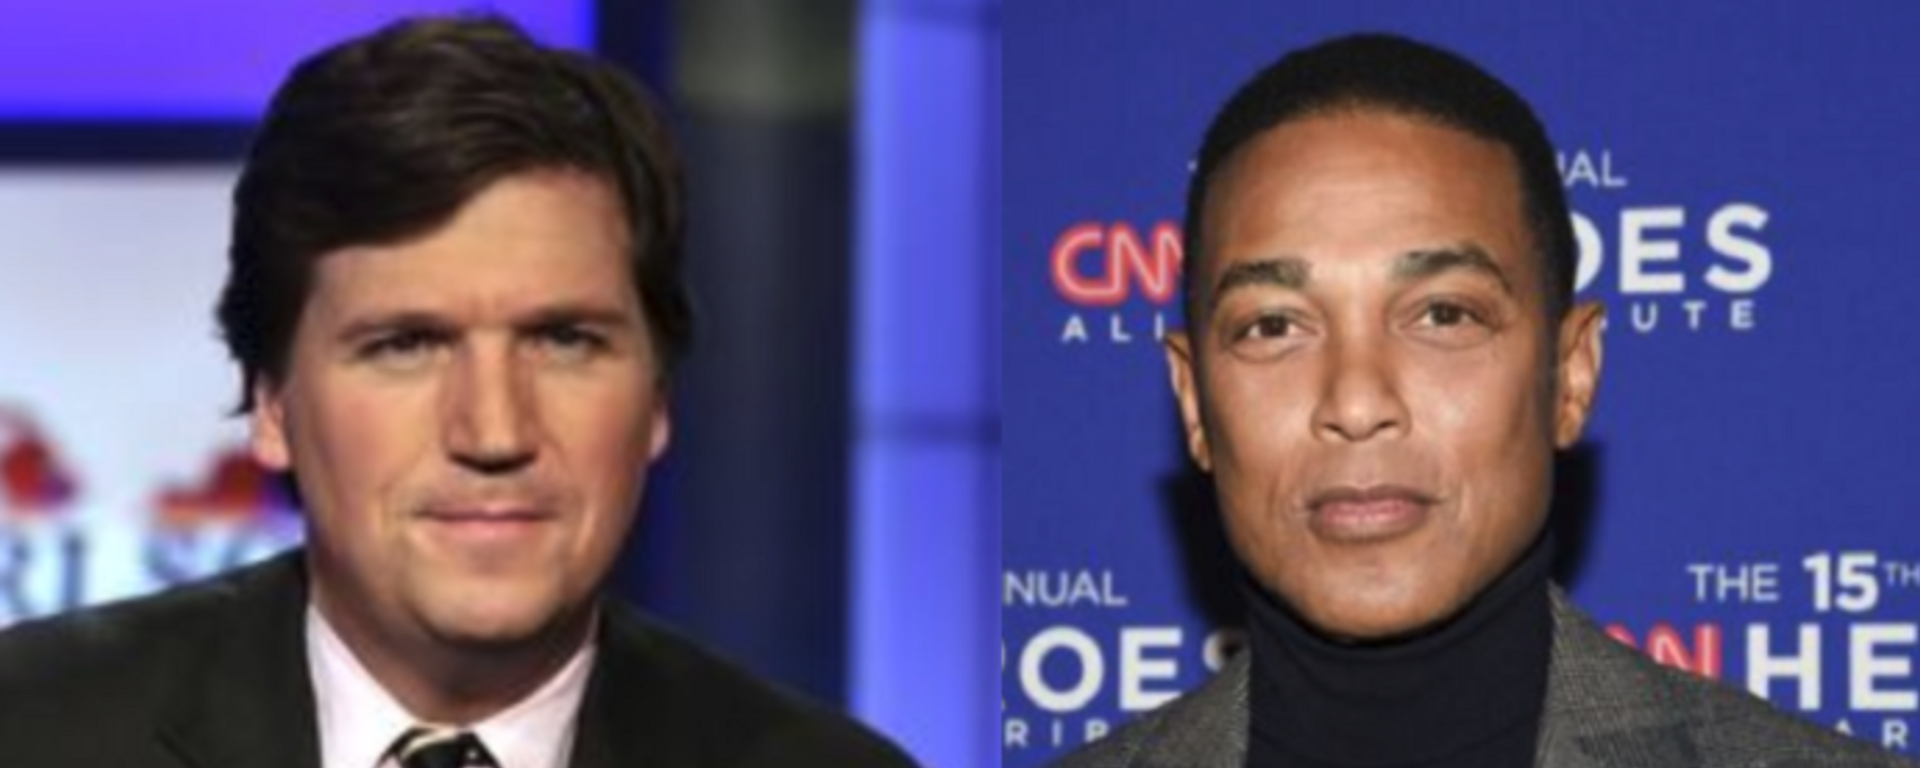 Collage image capturing CNN's Don Lemon and Fox News' Tucker Carlson. News broke on April 24, 2023, within hours of each other that both media figures had been let go by their respective employers. - Sputnik International, 1920, 24.04.2023